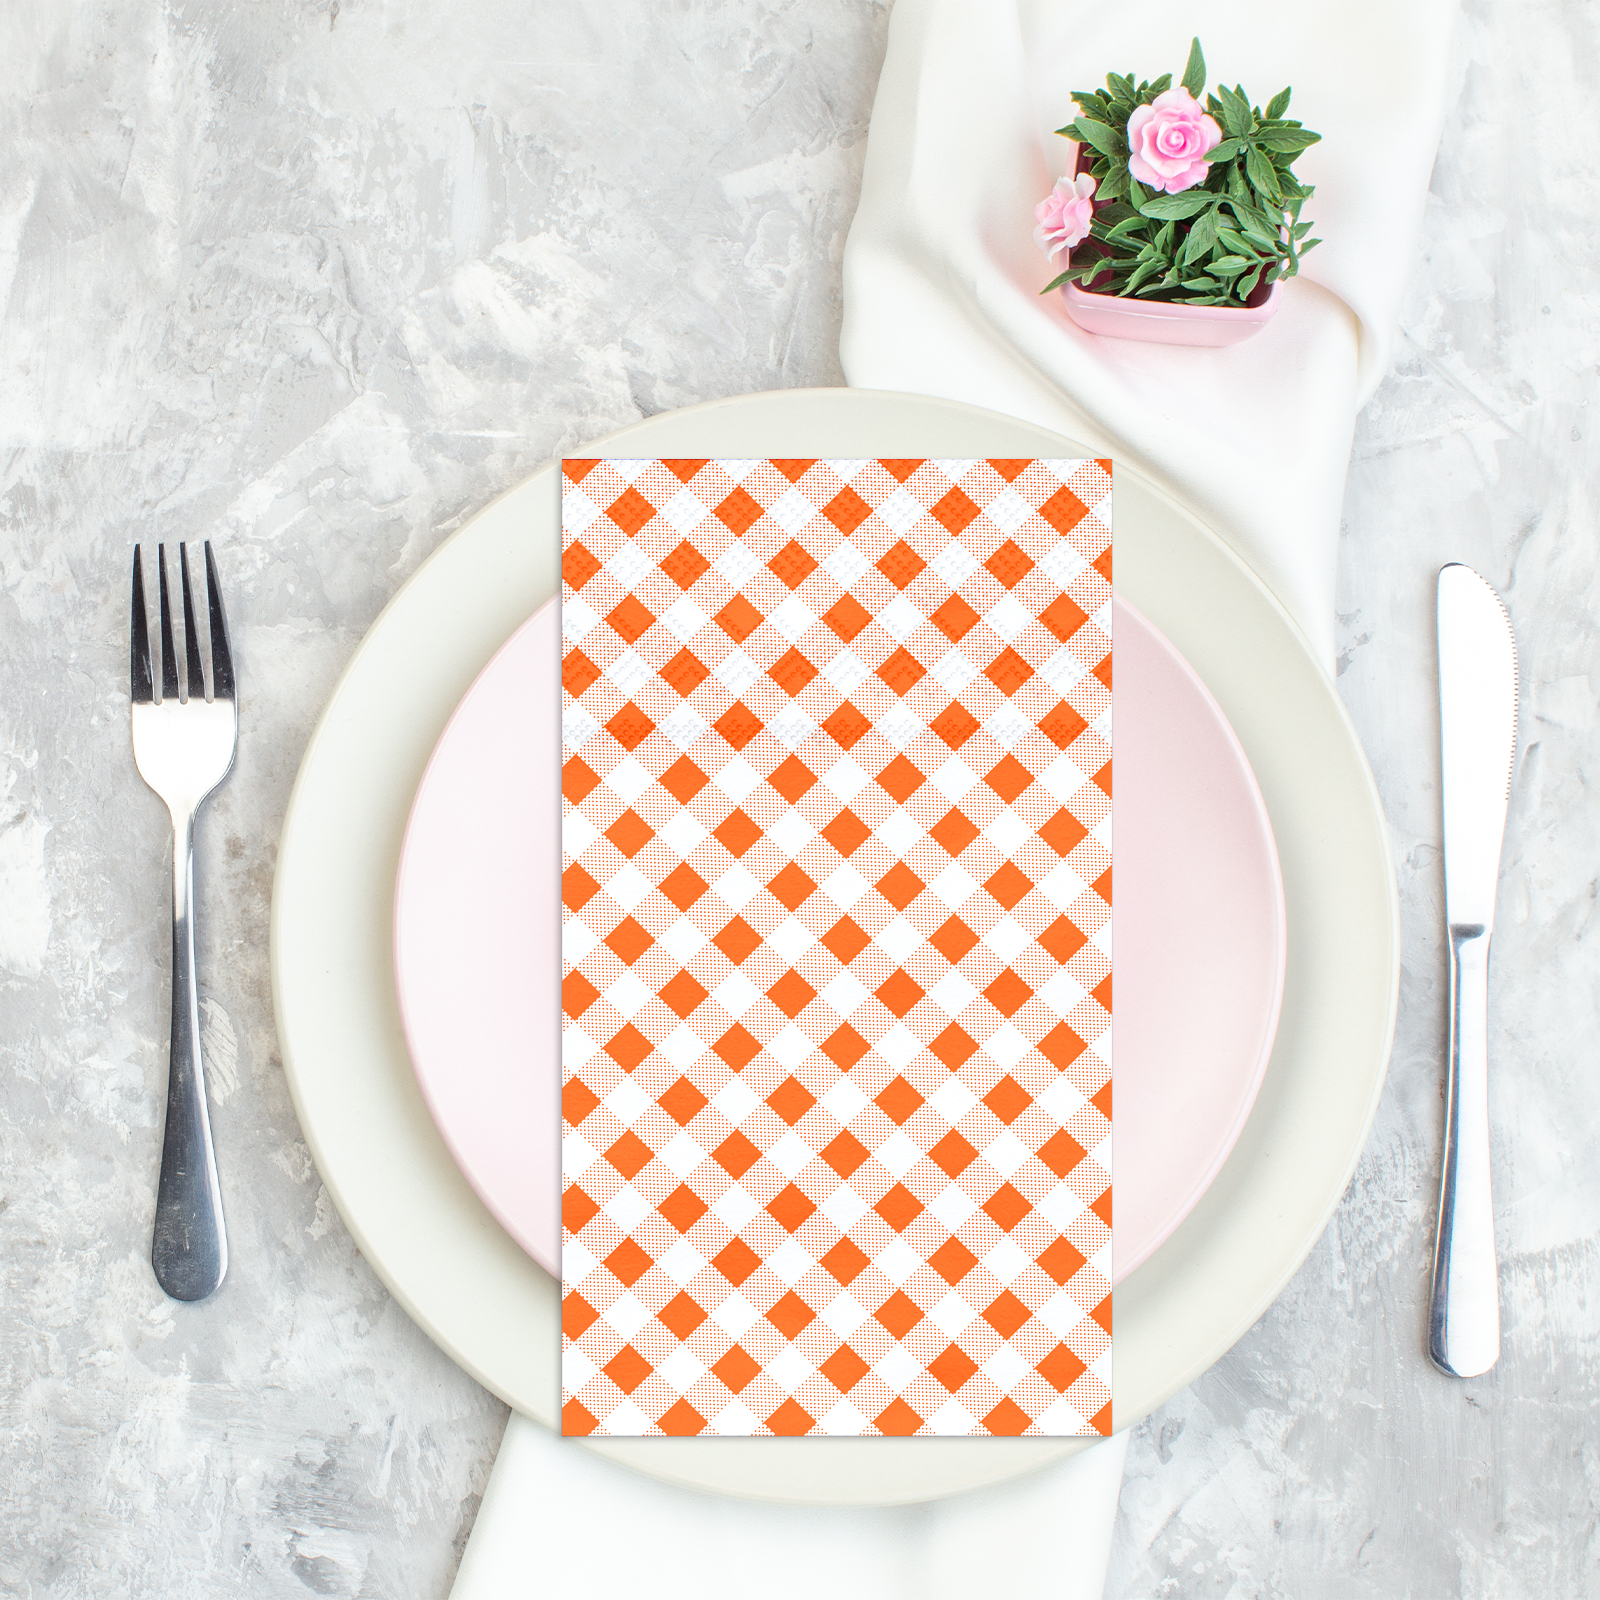 DYLIVeS 50 Count Orange Buffalo plaid Napkins Disposable Towels Orange and White Checkered Guest Napkins 3 Ply Dinner Napkins Gingham Paper Napkins - image 4 of 7